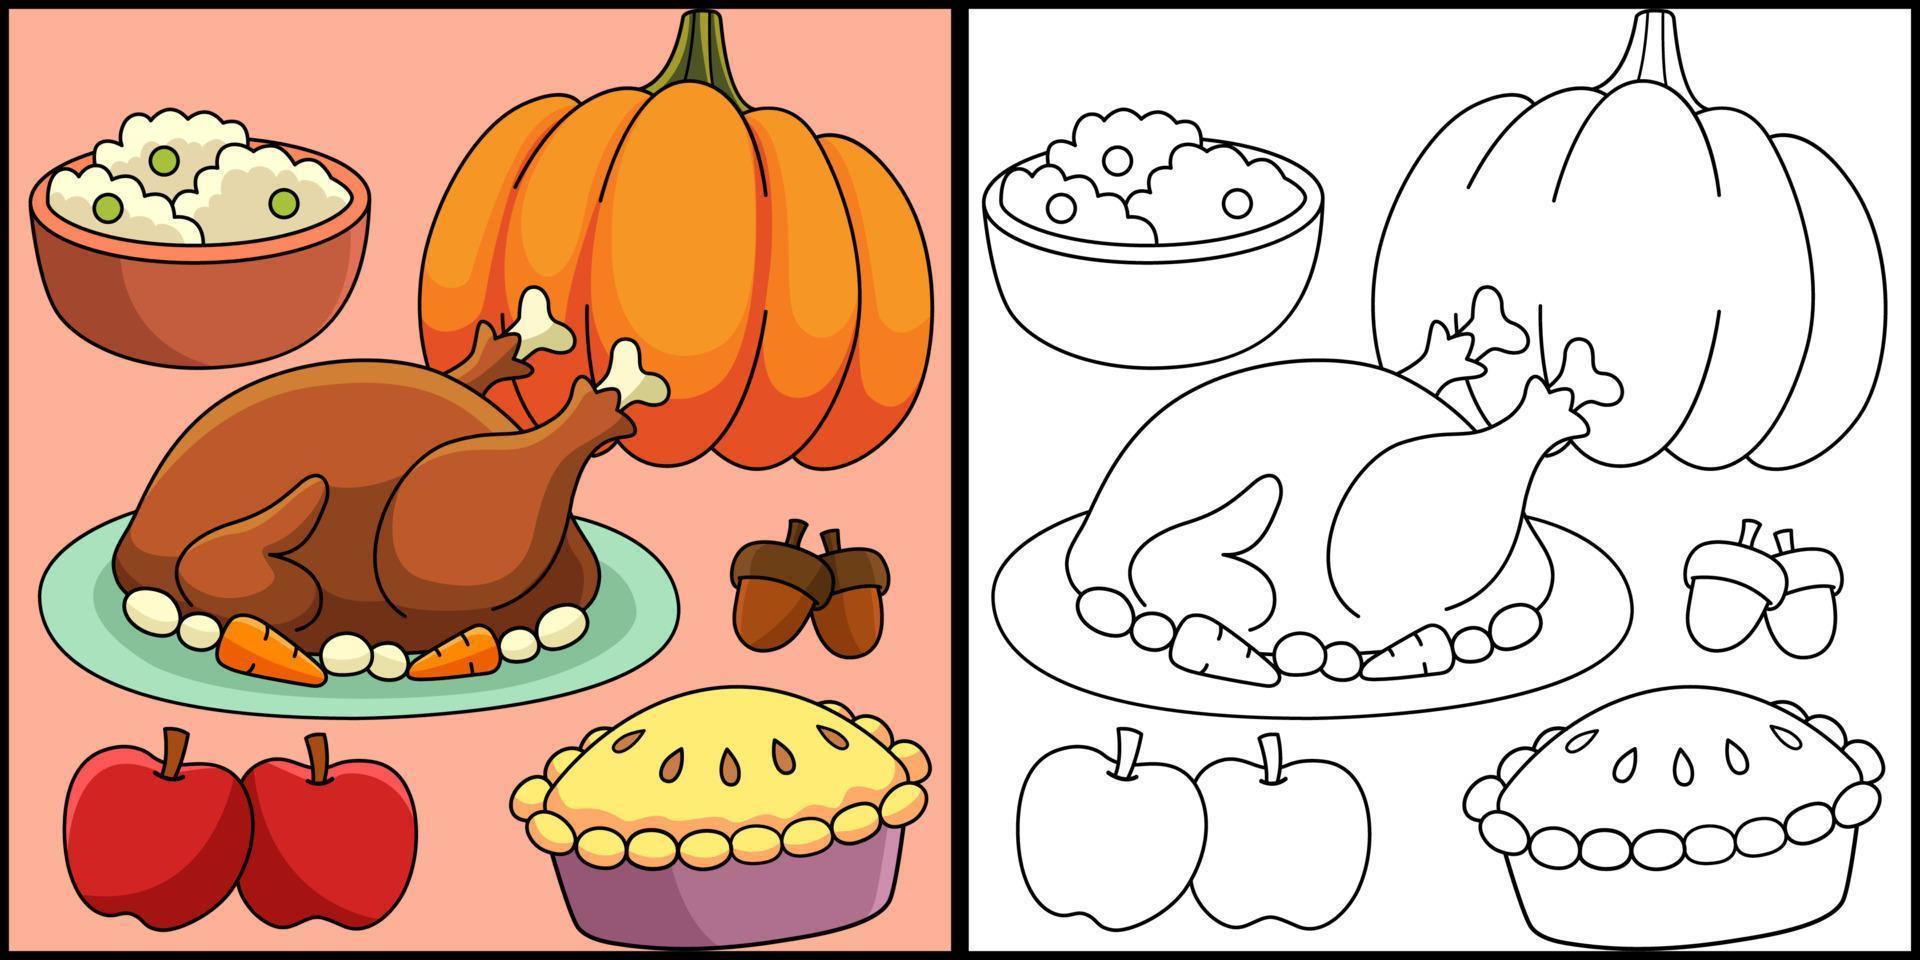 Thanksgiving Feast Coloring Page Illustration vector